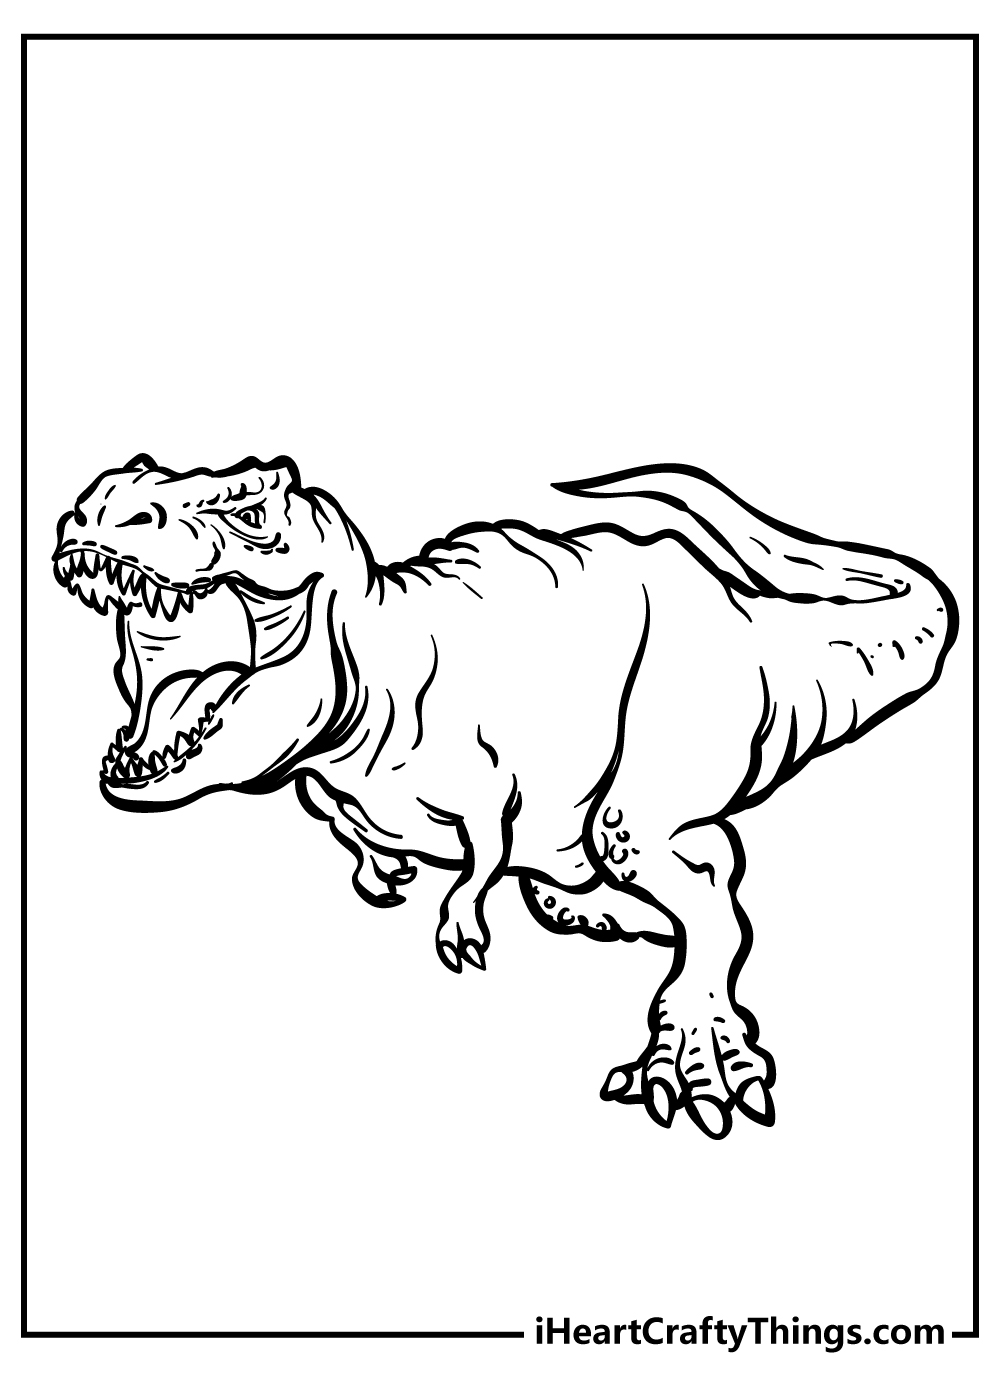 Jurassic World Coloring Book for adults free download